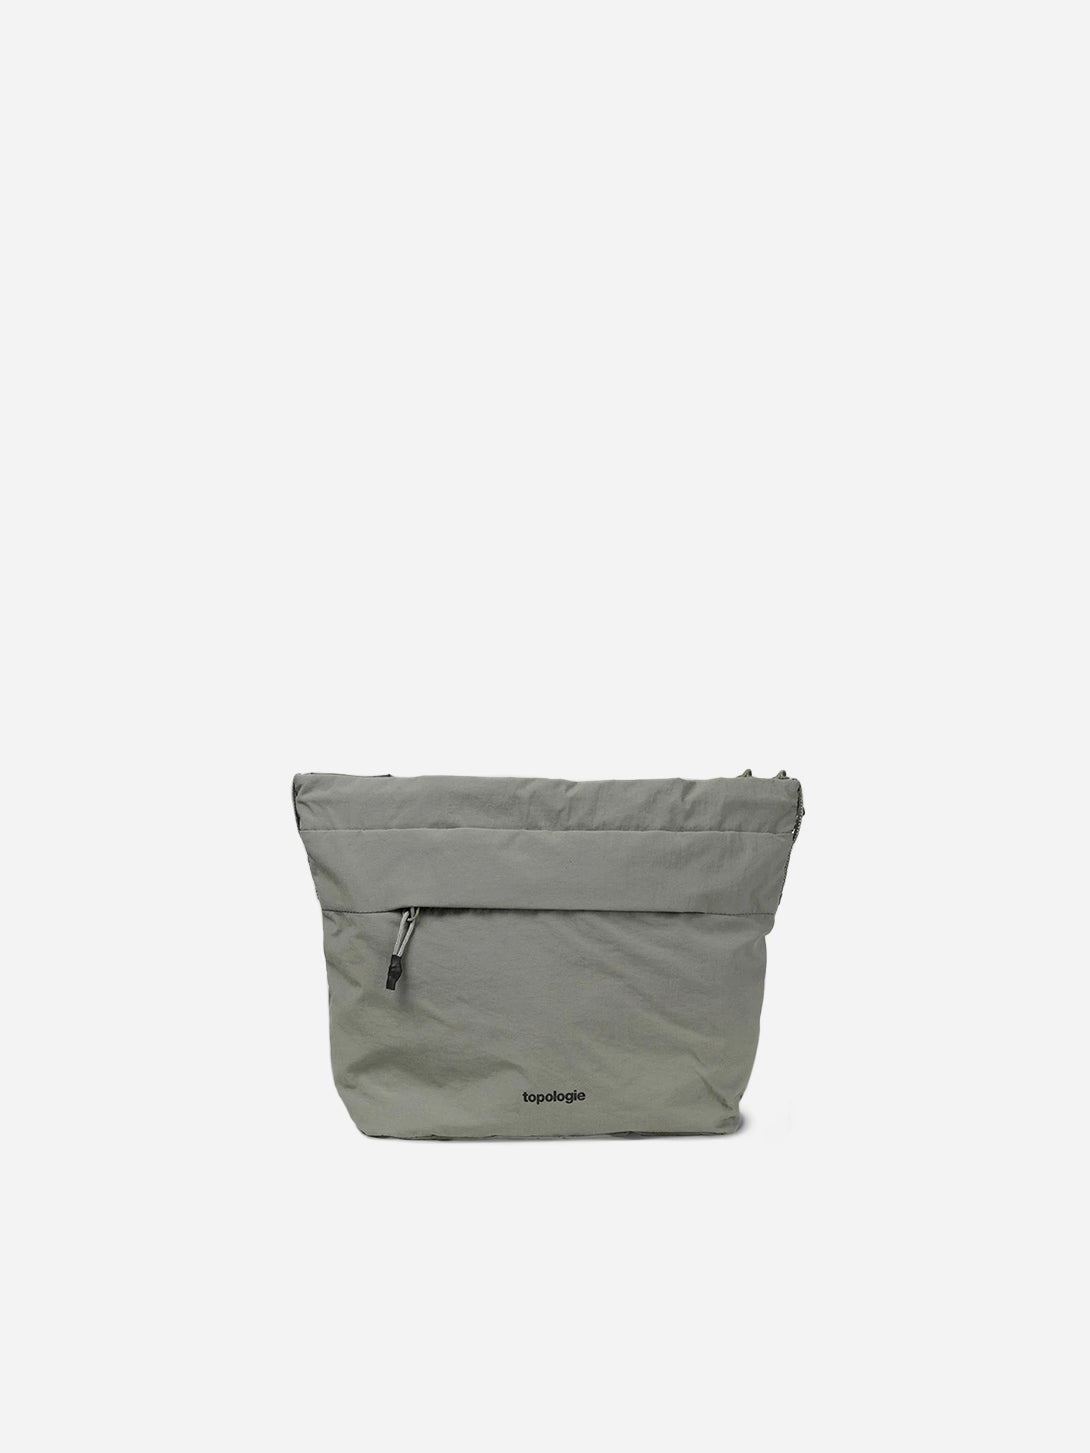 Moss Papery Besace (Bag Only) Topologie Utility Bag